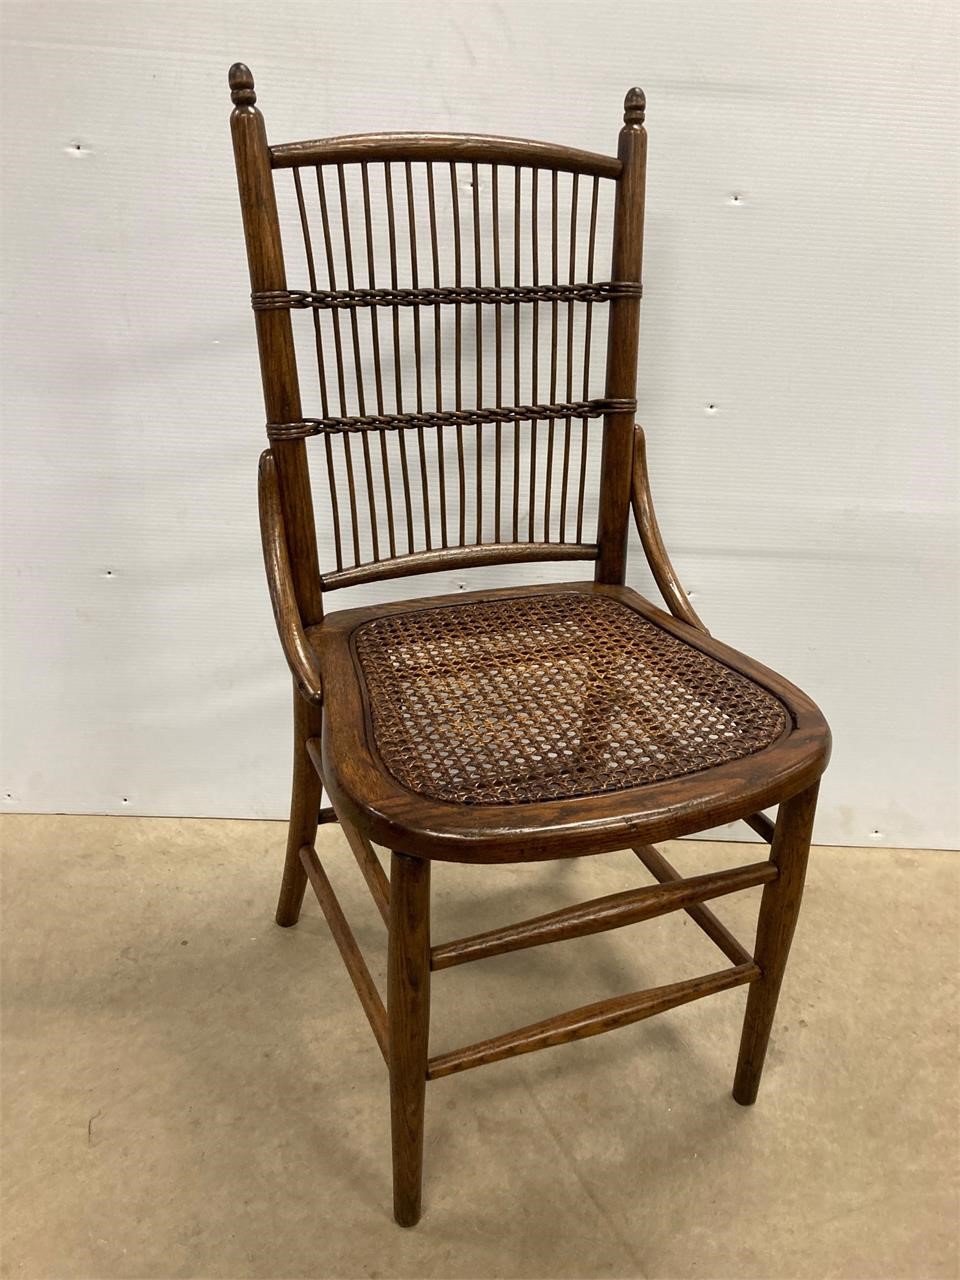 Wicker seat wood chair. Solid. Complete